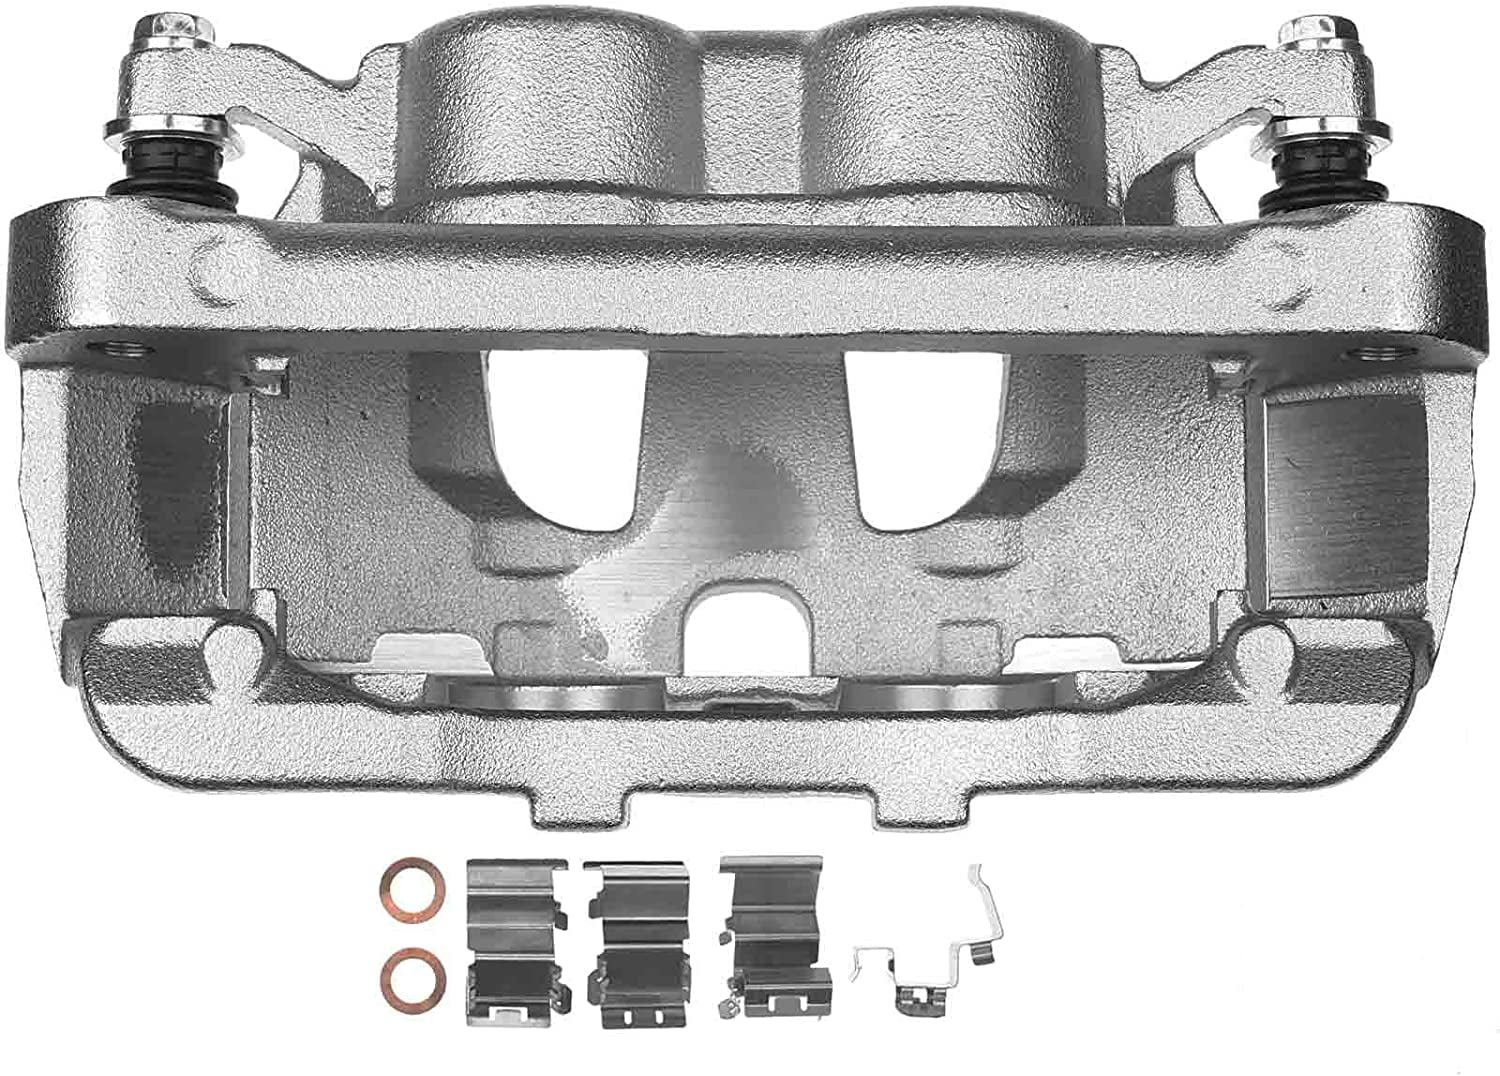 A-Premium Brake Caliper Assembly with Bracket Compatible with Ford F-250 F-350 F-450 Super Duty 2013-2019 Front Driver Side 